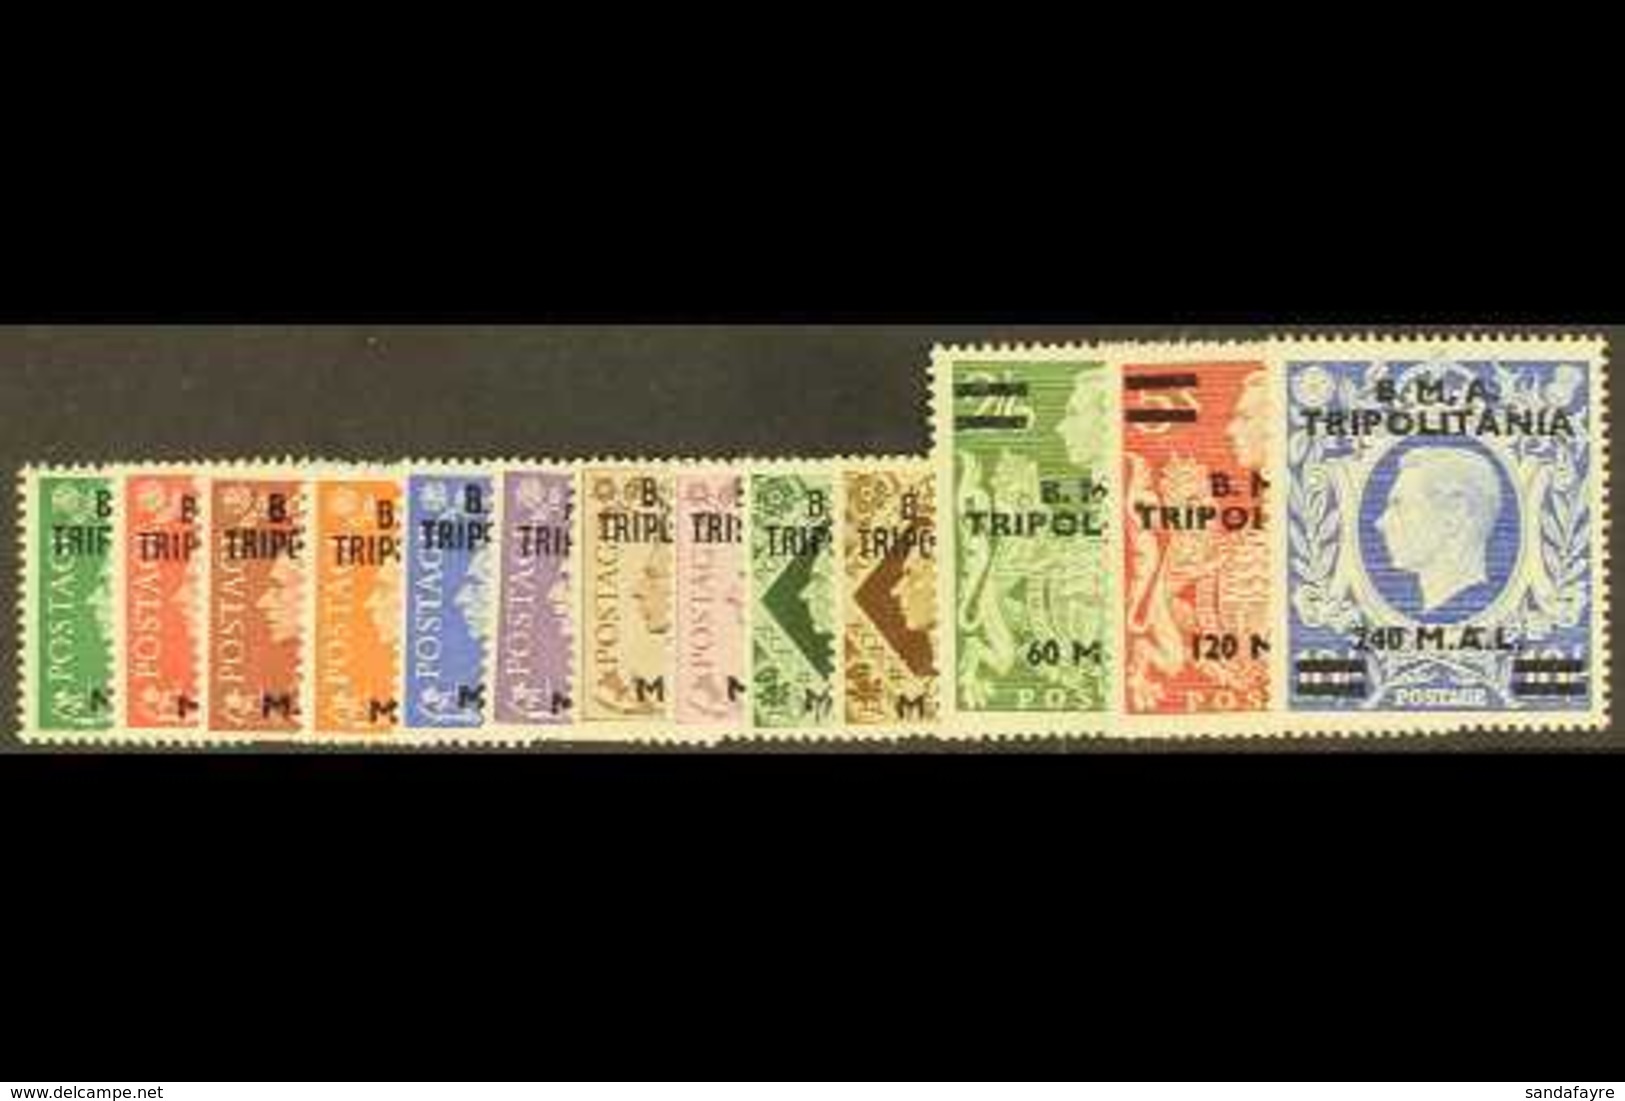 TRIPOLITANIA 1948 B.M.A. Surcharge Set Complete, SG T1/13, Very Fine Never Hinged Mint. (13 Stamps) For More Images, Ple - Afrique Orientale Italienne